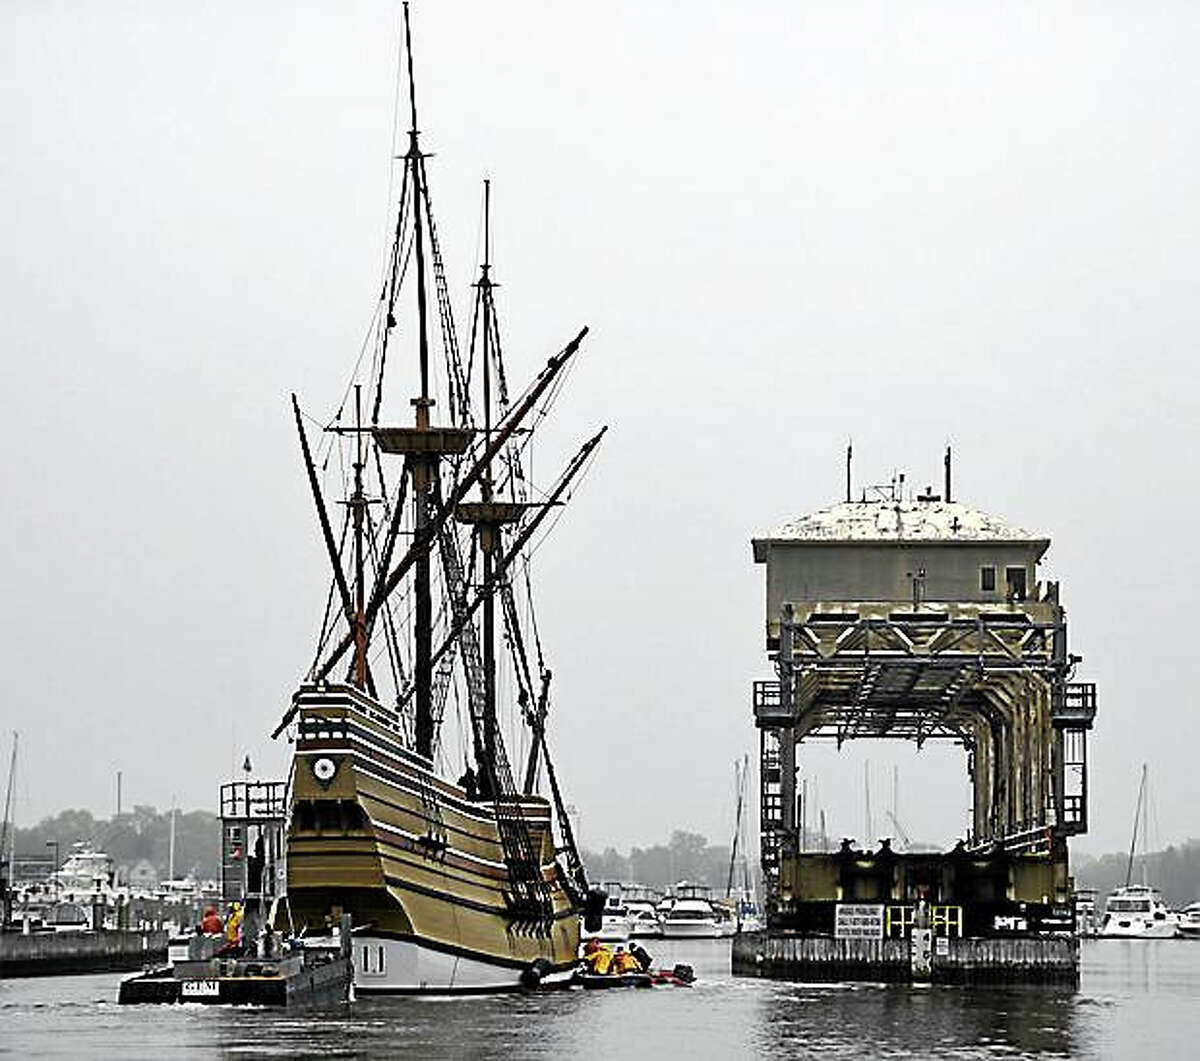 Mayflower II being towed in the Mystic River, past the Mystic River Bridge